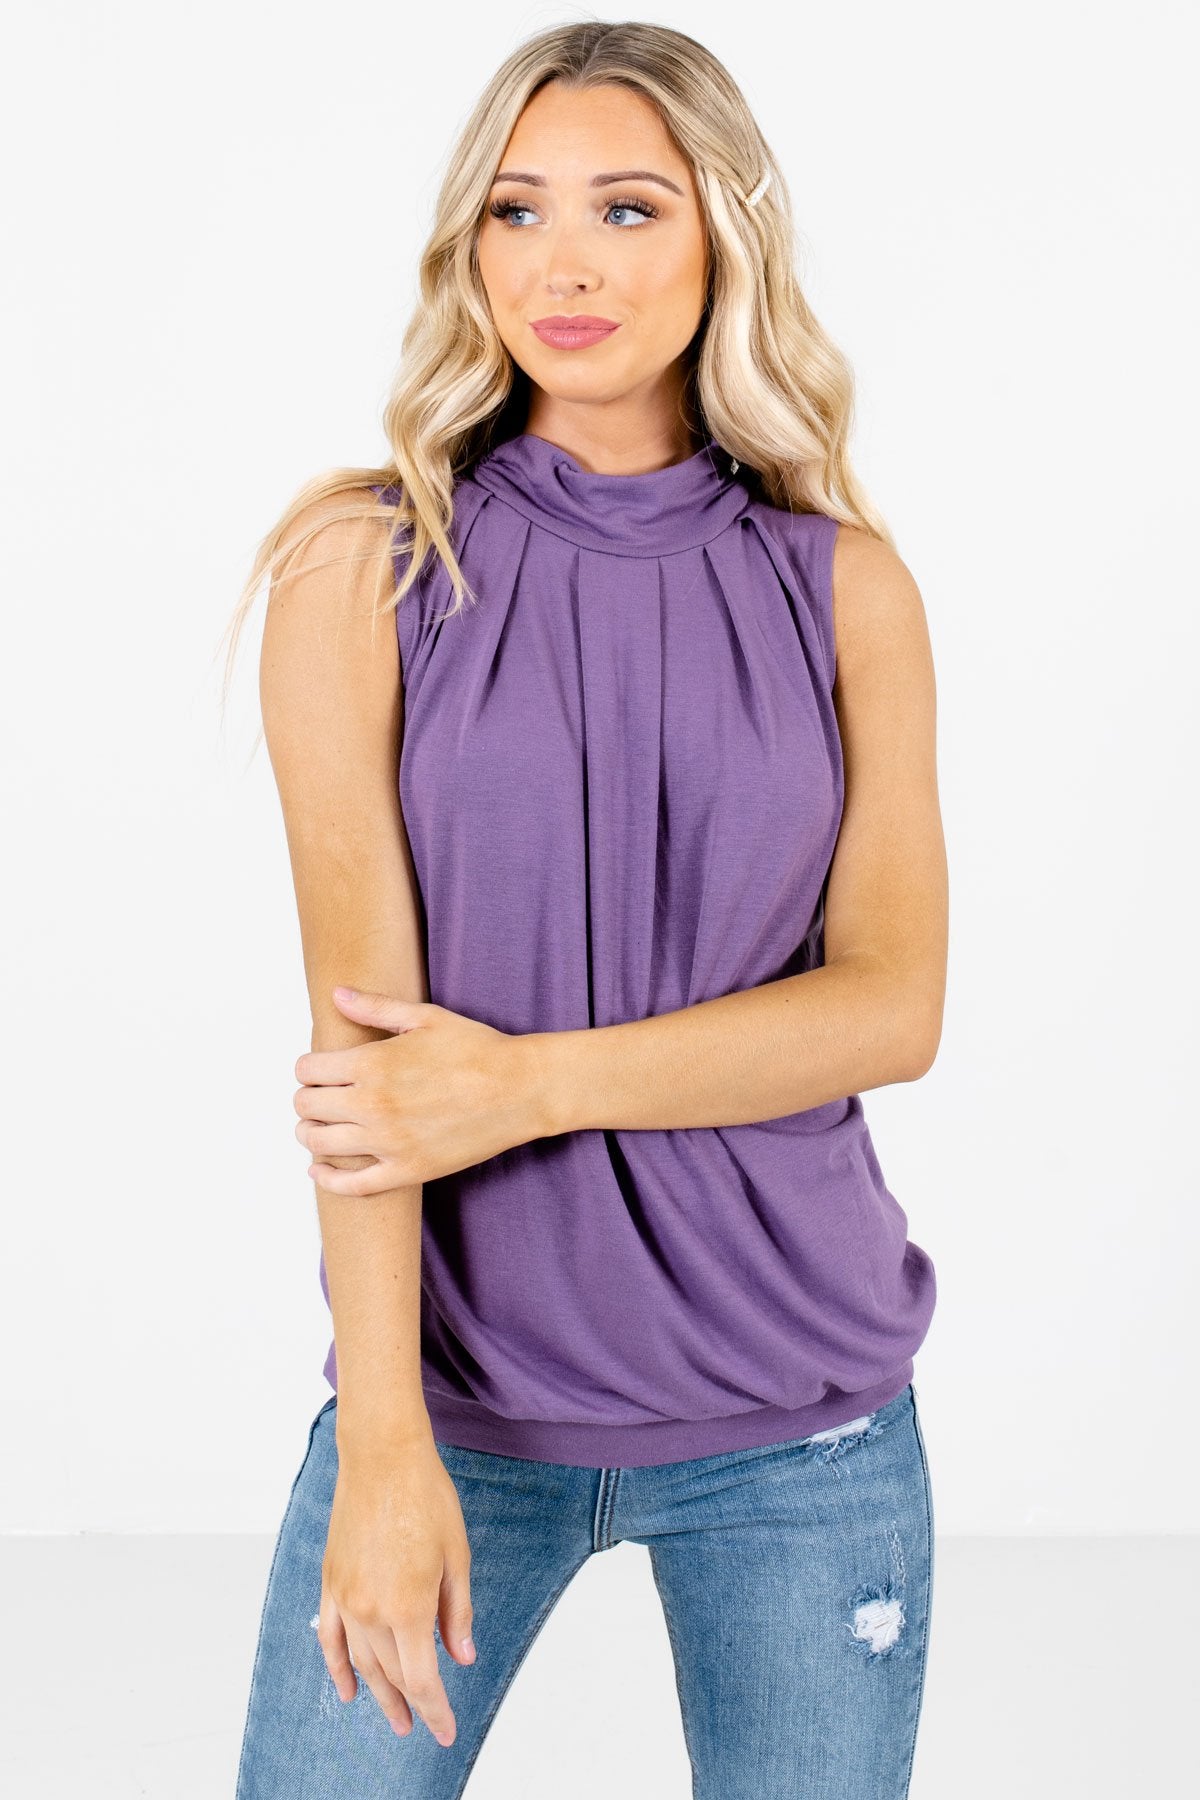 Purple Cute and Comfortable Boutique Tank Tops for Women